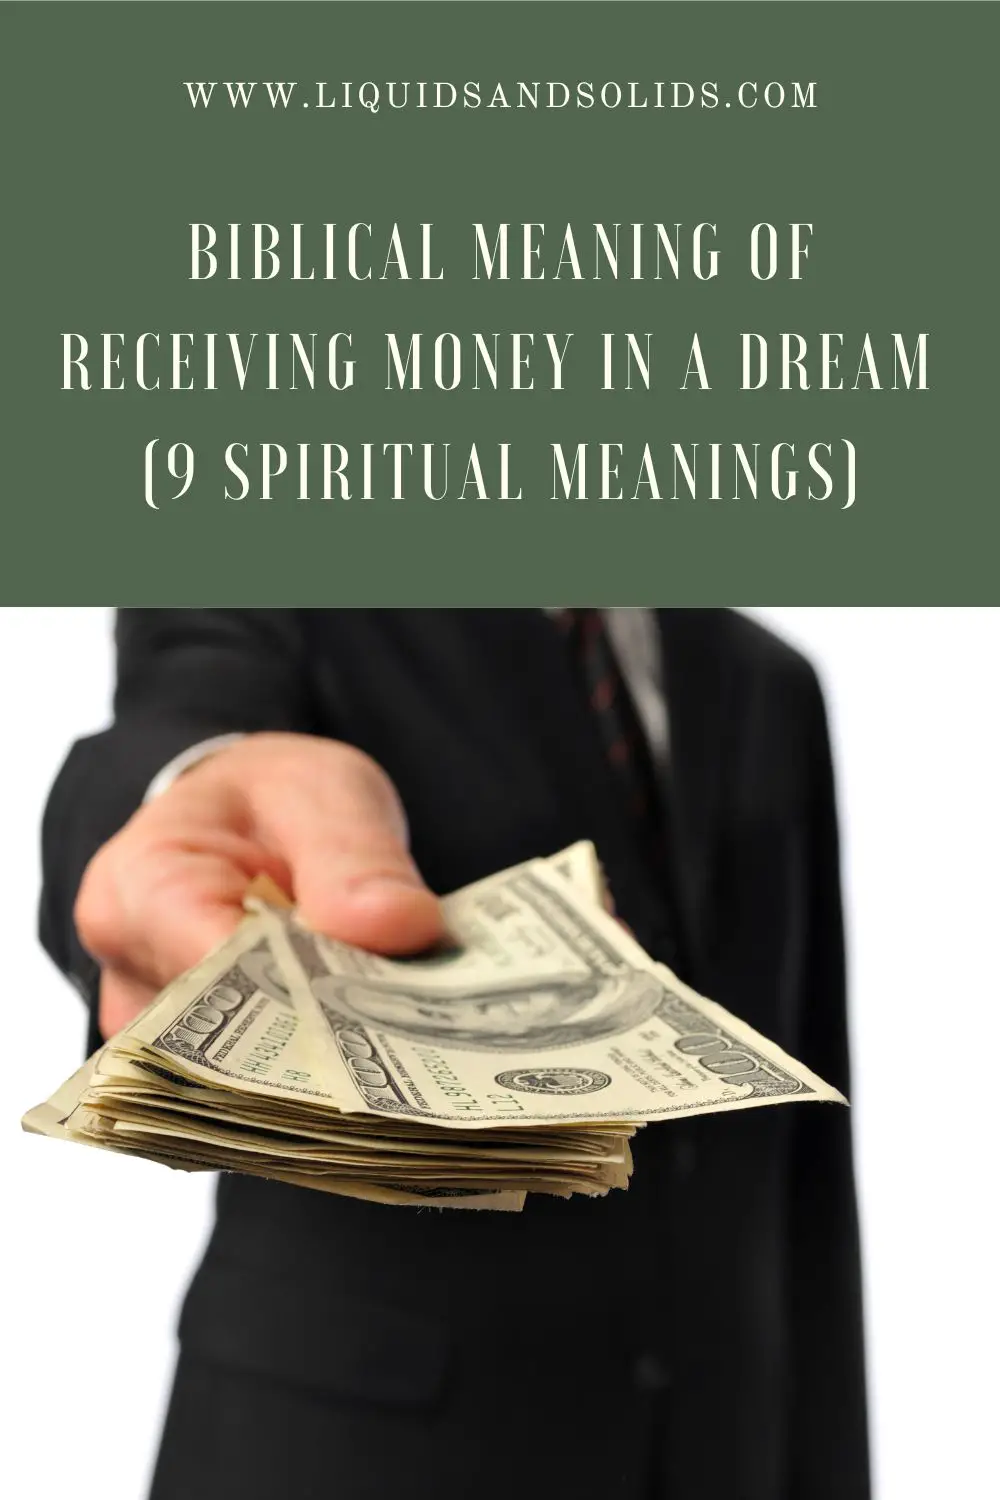 What Is The Spiritual Meaning Of Dreaming Of Losing Money?